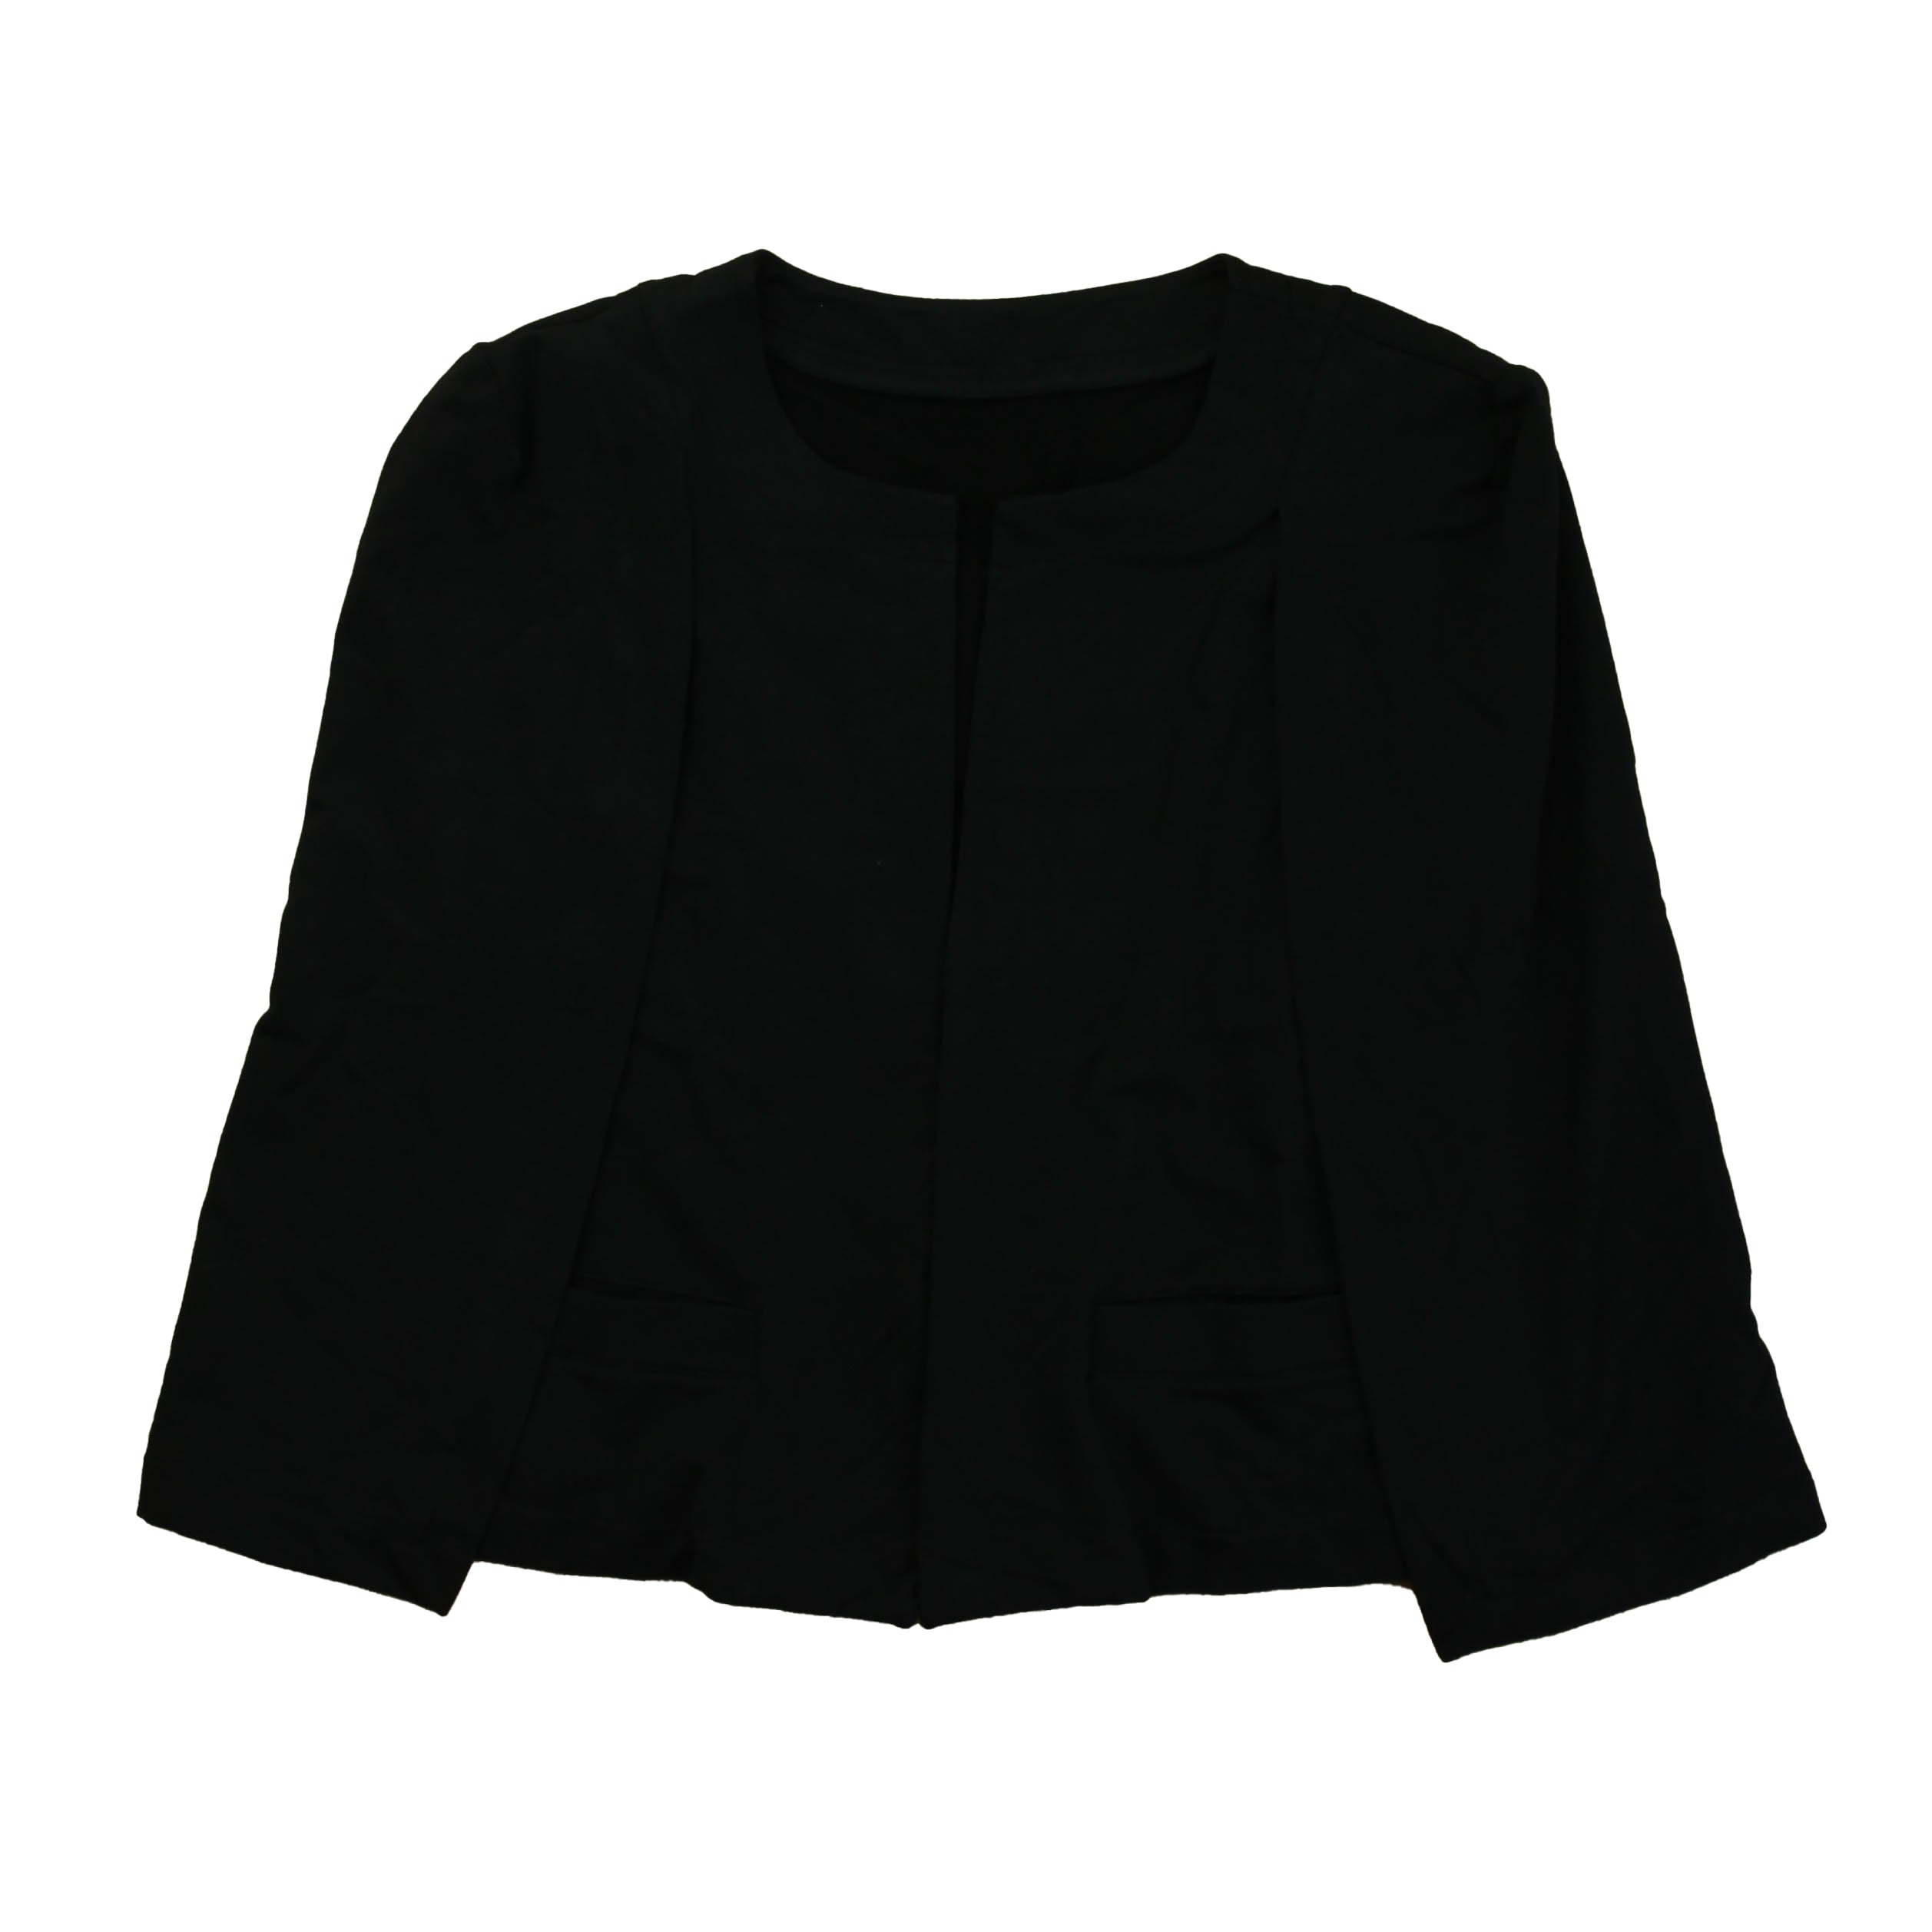 Pre-owned Black Jacket size: Womens Large